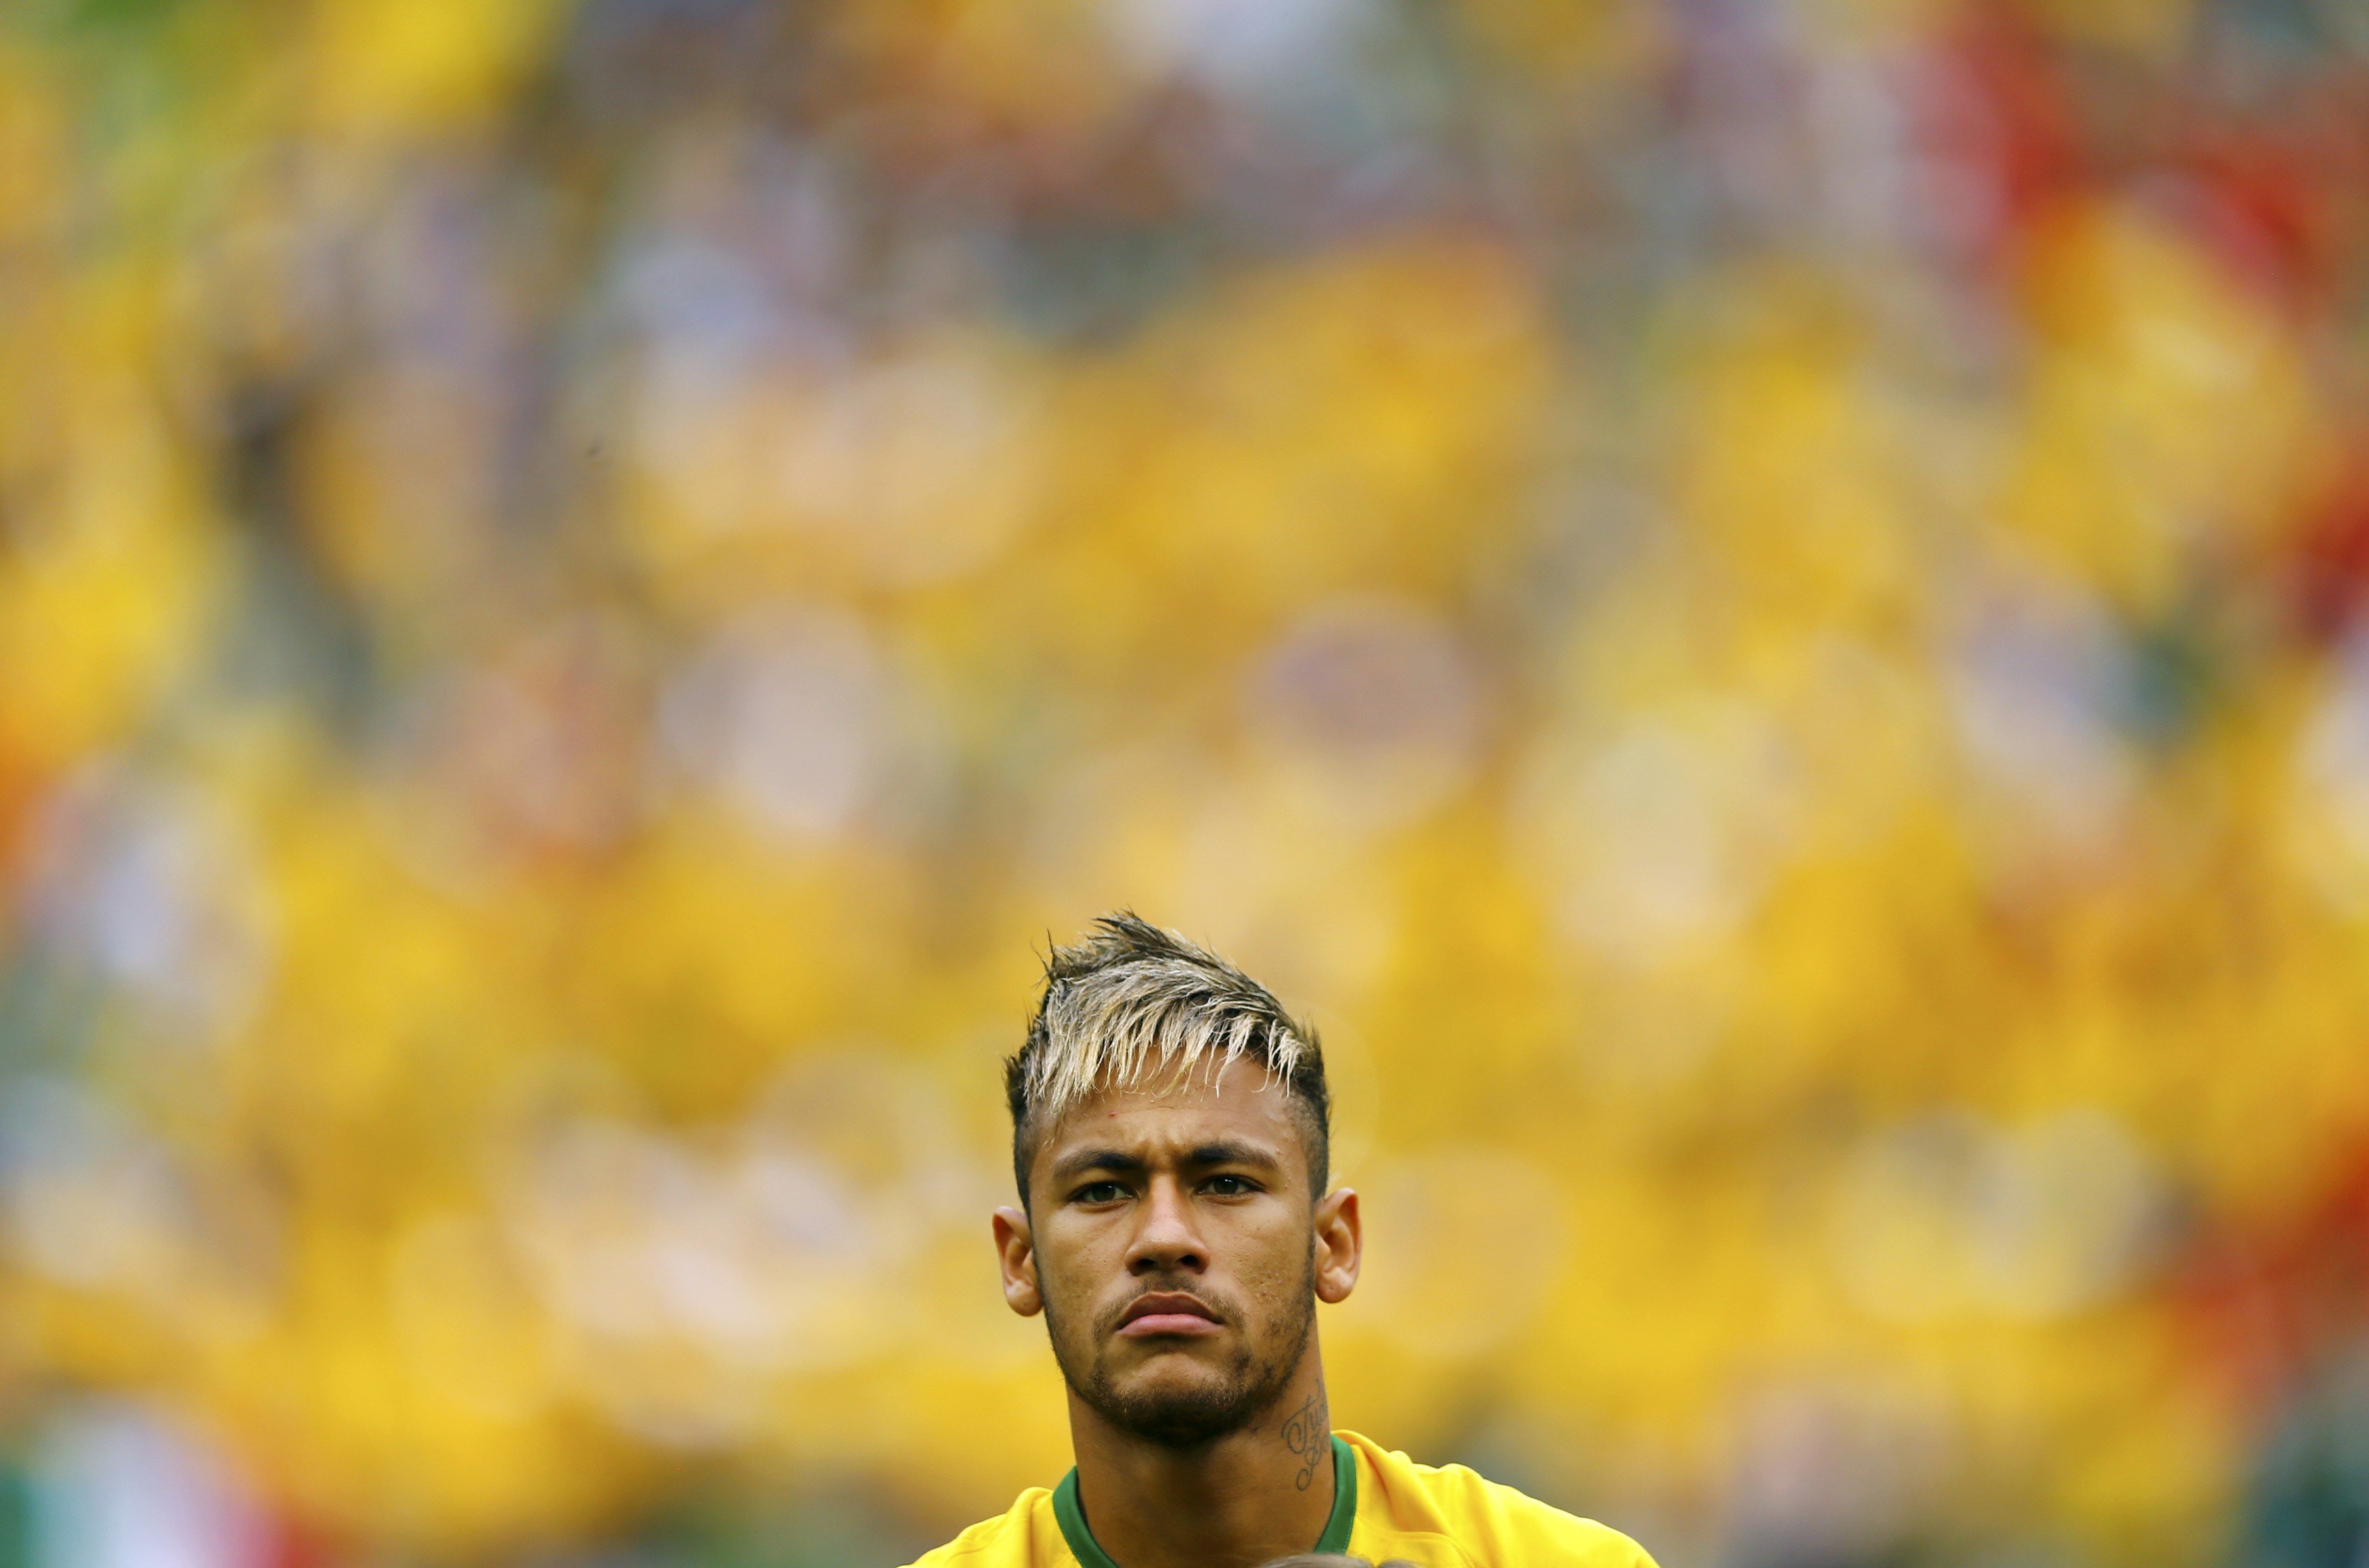 Brazil's Neymar stands during the 2014 World Cup Group A soccer match between Brazil and Mexico at the Castelao arena in Fortaleza June 17, 2014. REUTERS/Marcelo del Pozo (BRAZIL  - Tags: SOCCER SPORT WORLD CUP)